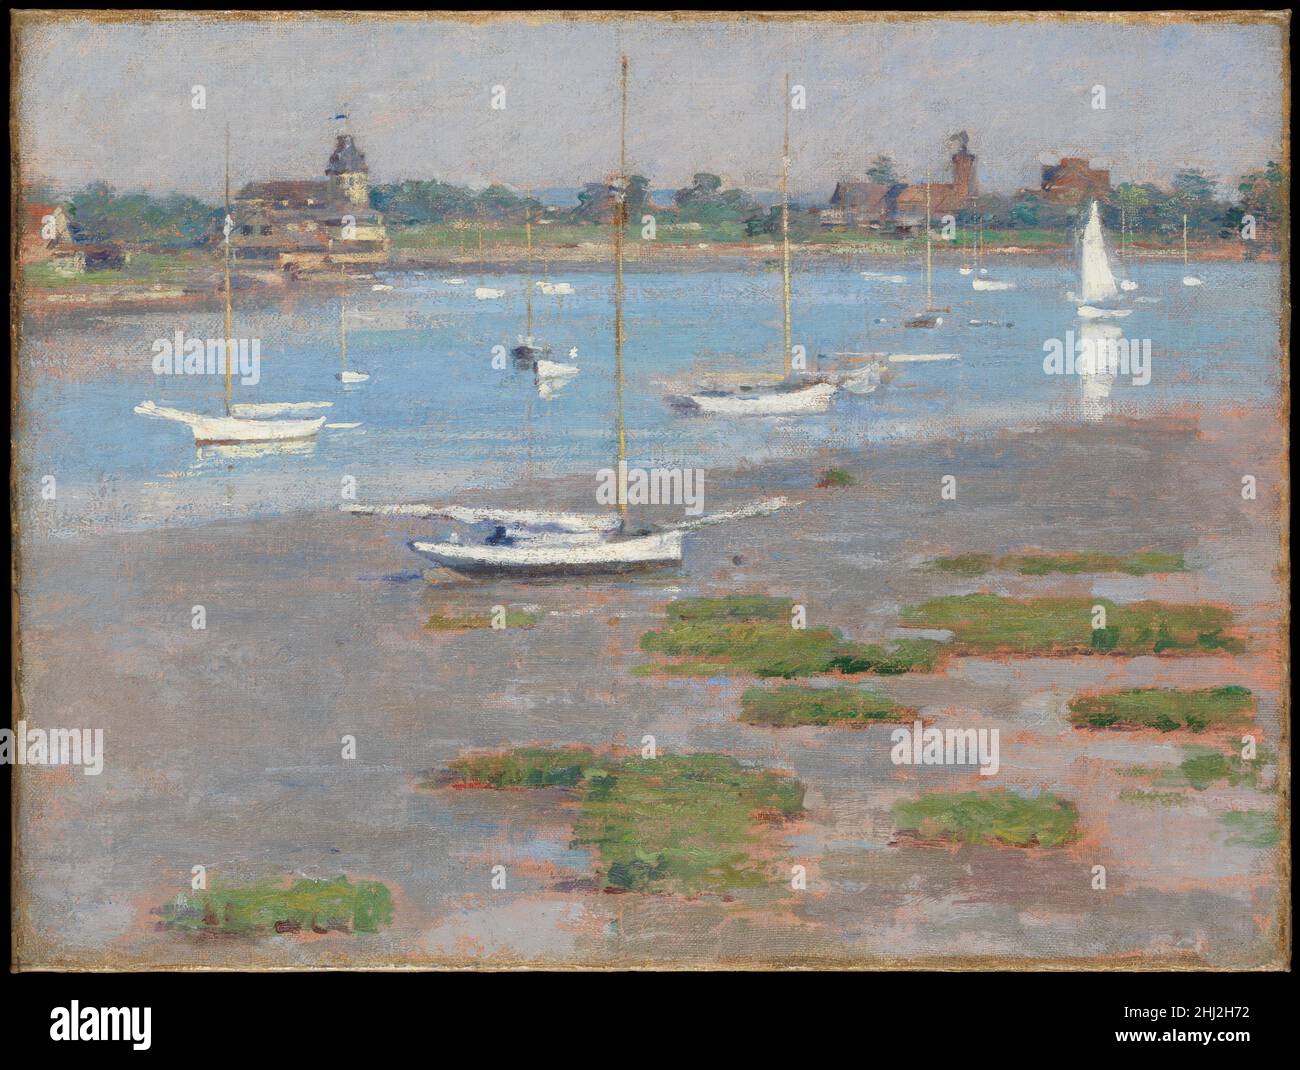 Low Tide, Riverside Yacht Club 1894 Theodore Robinson American This work is one of a series of coastal scenes painted by Theodore Robinson at Cos Cob, Connecticut, a popular American artists’ colony. It reveals how the painter synthesized the earlier influence of Claude Monet with a newfound interest in Japanese prints. As Robinson observed after acquiring his first print in 1894, “My Japanese print points in a direction I must try and take: an aim for refinement and a kind of precision seen in the best old as well as modern work.”. Low Tide, Riverside Yacht Club  19523 Stock Photo